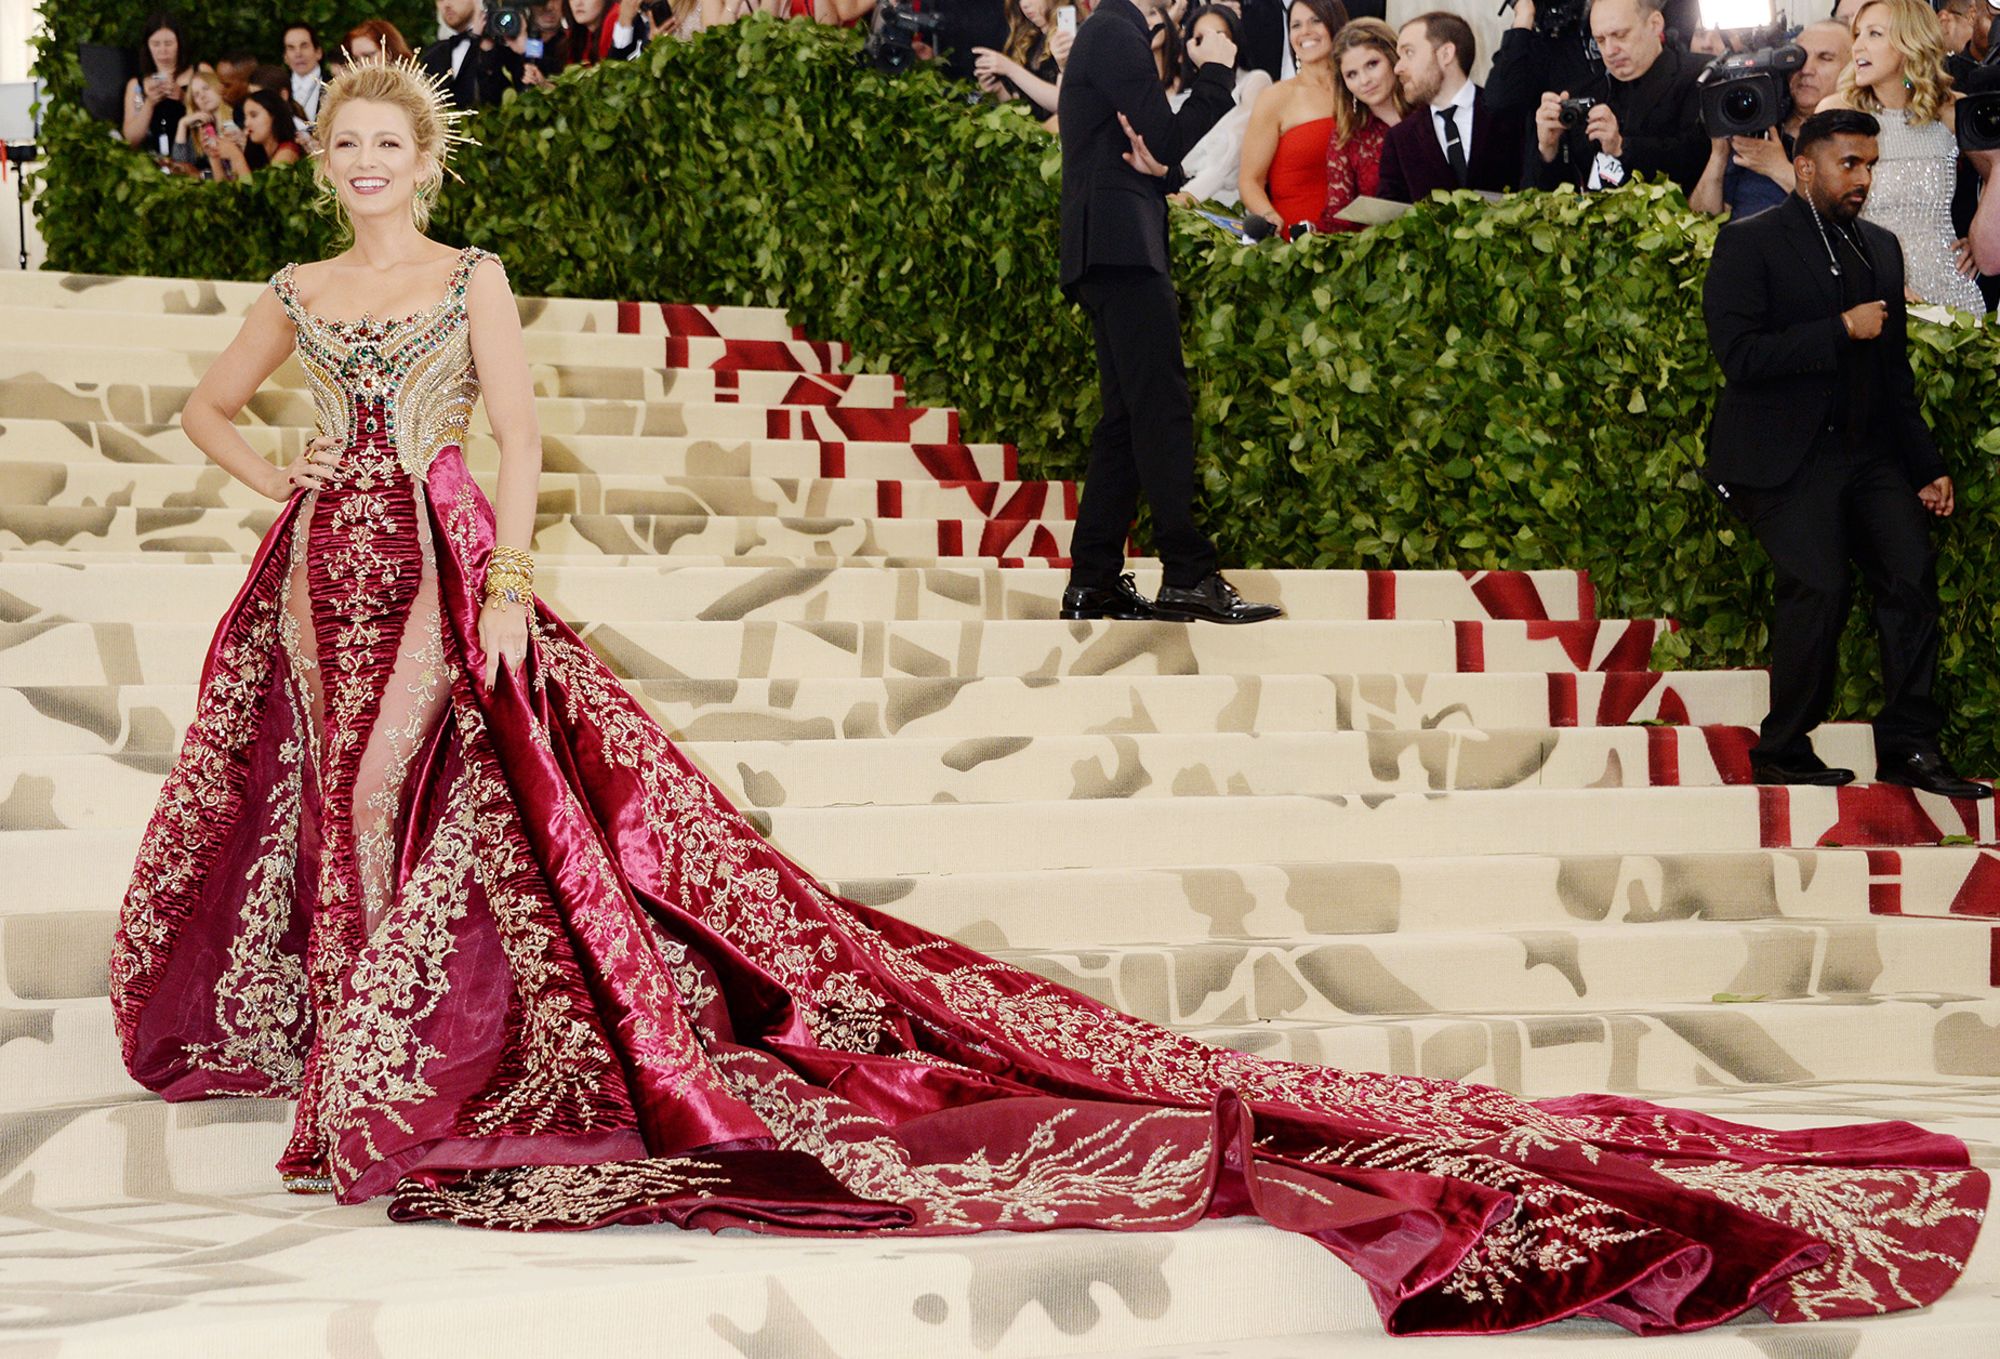 Blake Lively at the Met Gala in 2018. That year's Costume Institute exhibition and theme was "Heavenly Bodies: Fashion and the Catholic Imagination"